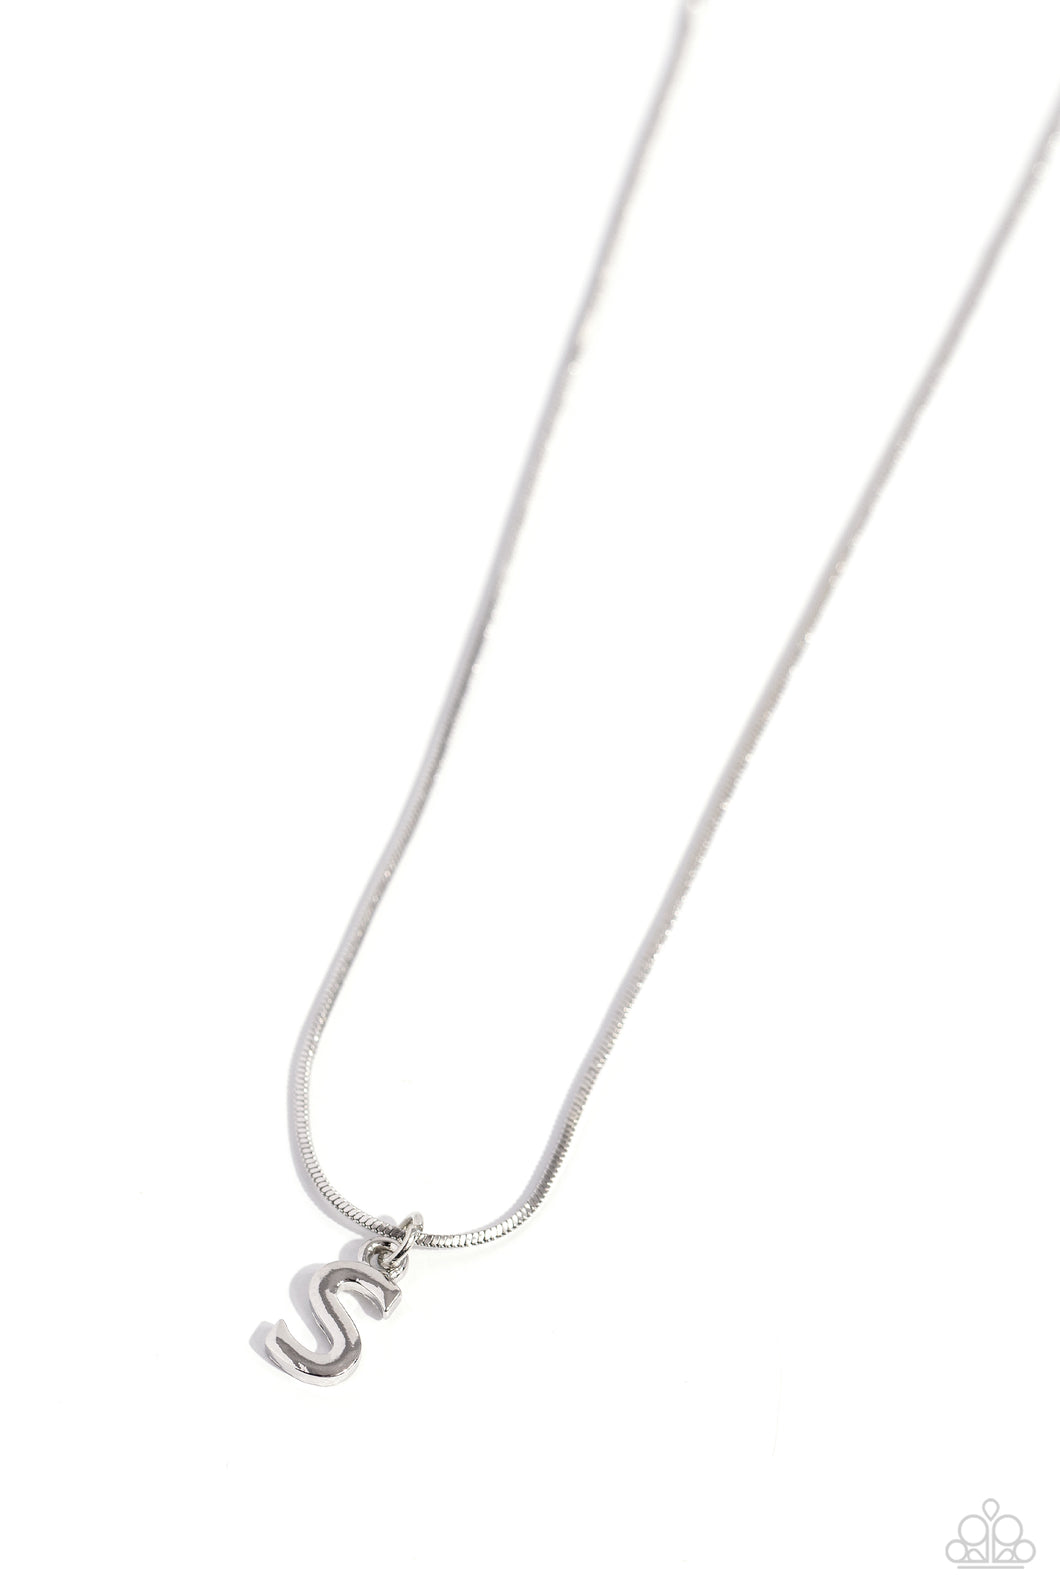 Seize the Initial - Silver - S - Necklace - Paparazzi - Dare2bdazzlin N Jewelry